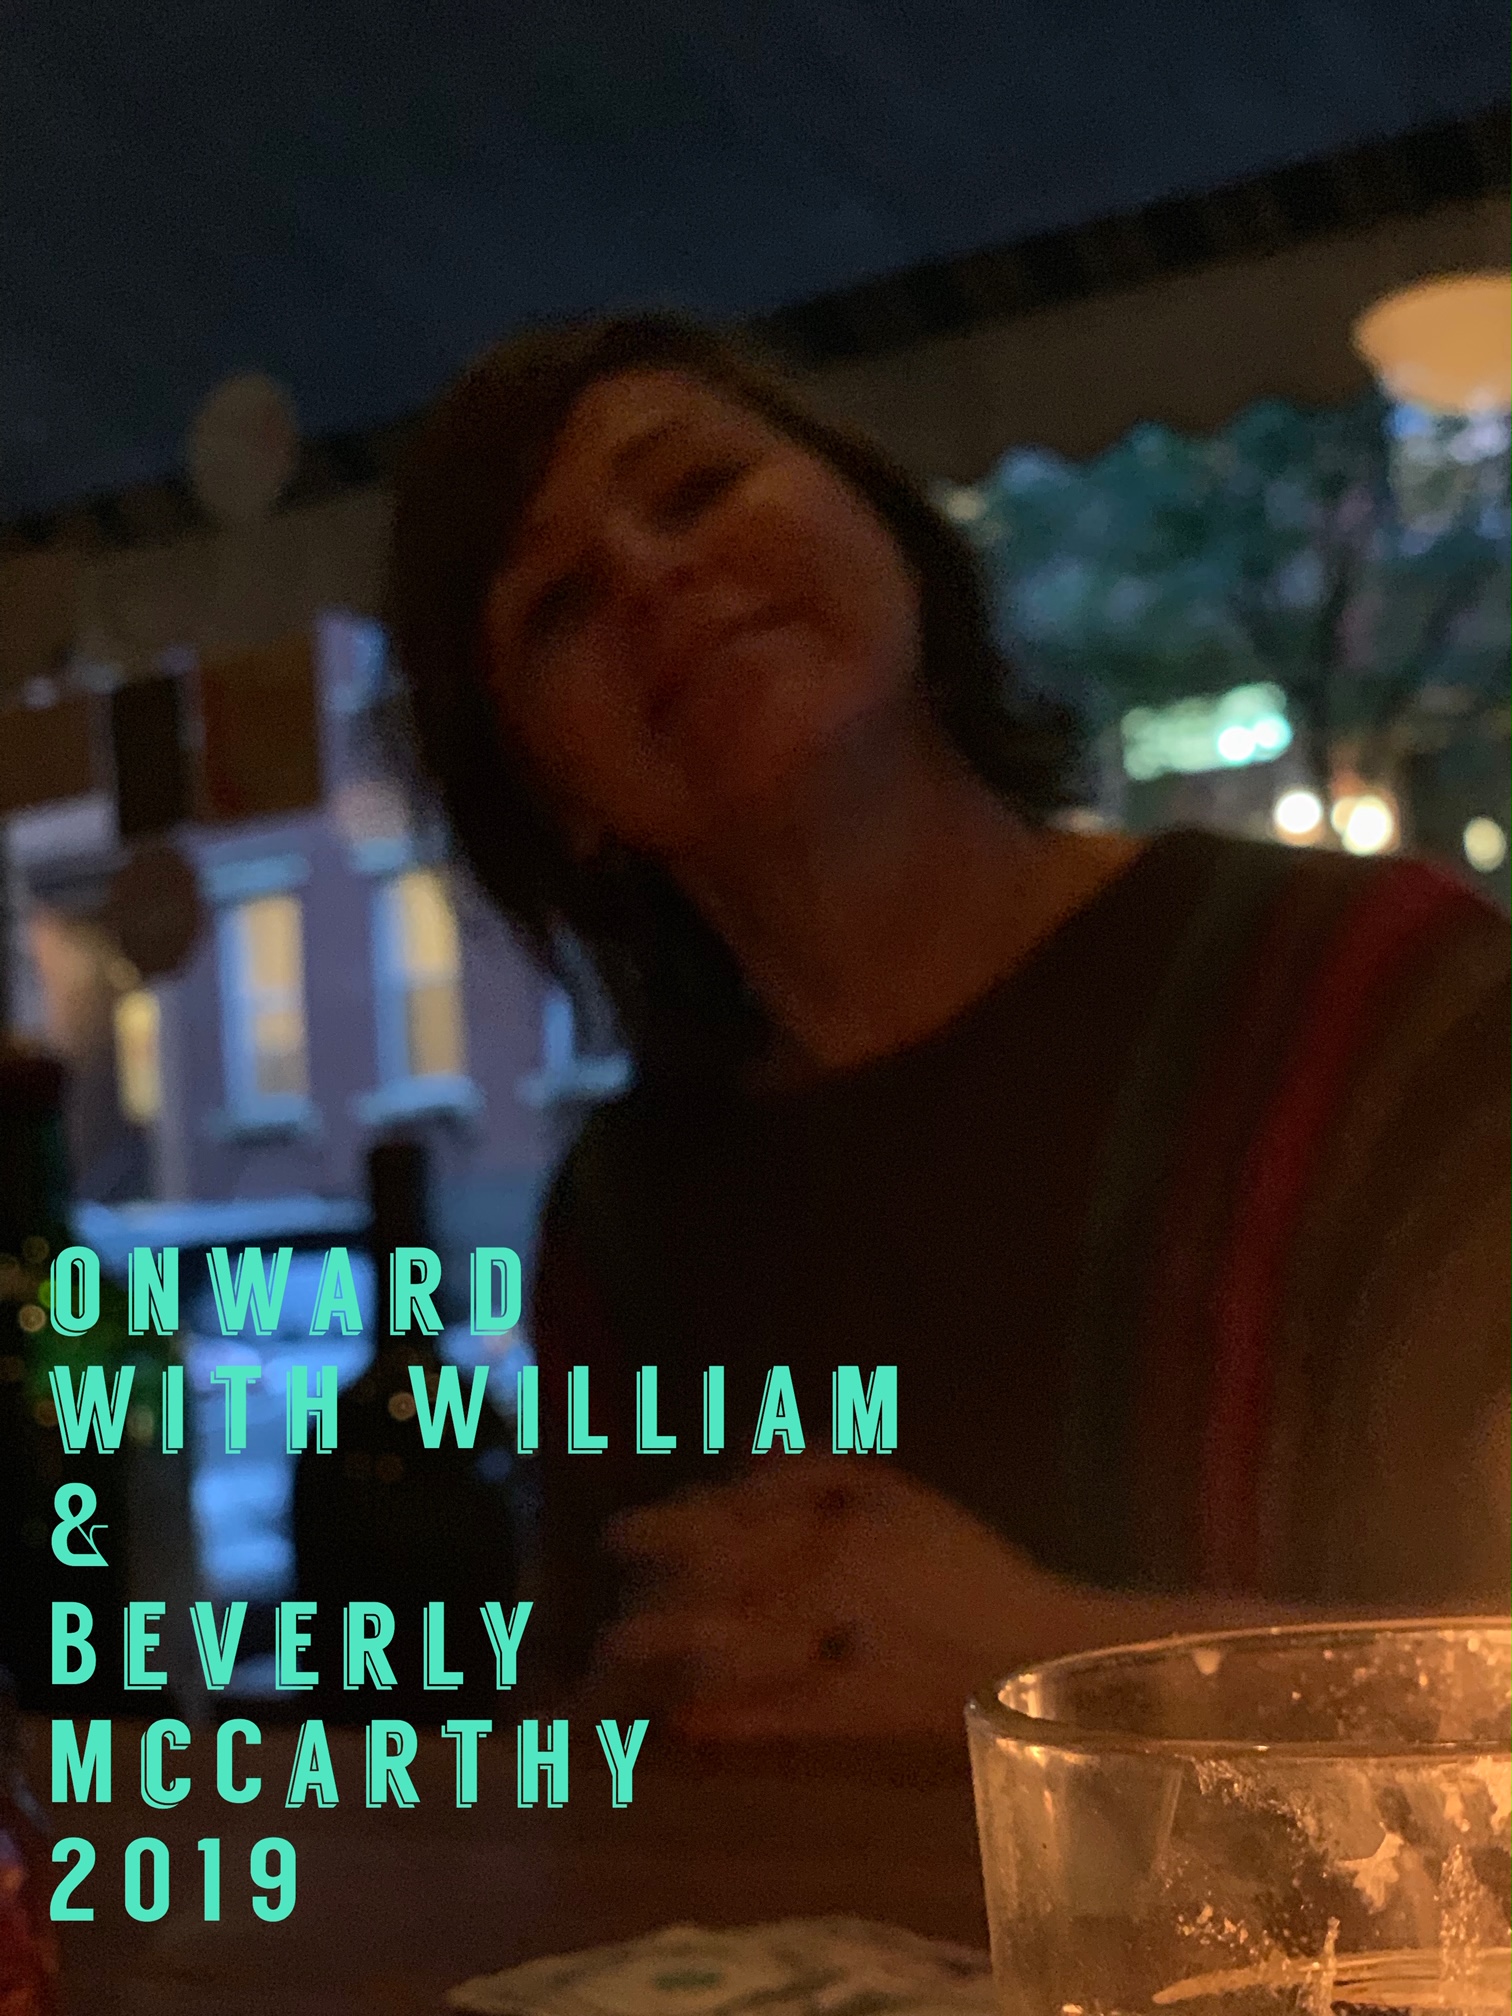 Onward with William and Beverly McCarthy live from Redhook Brooklyn!